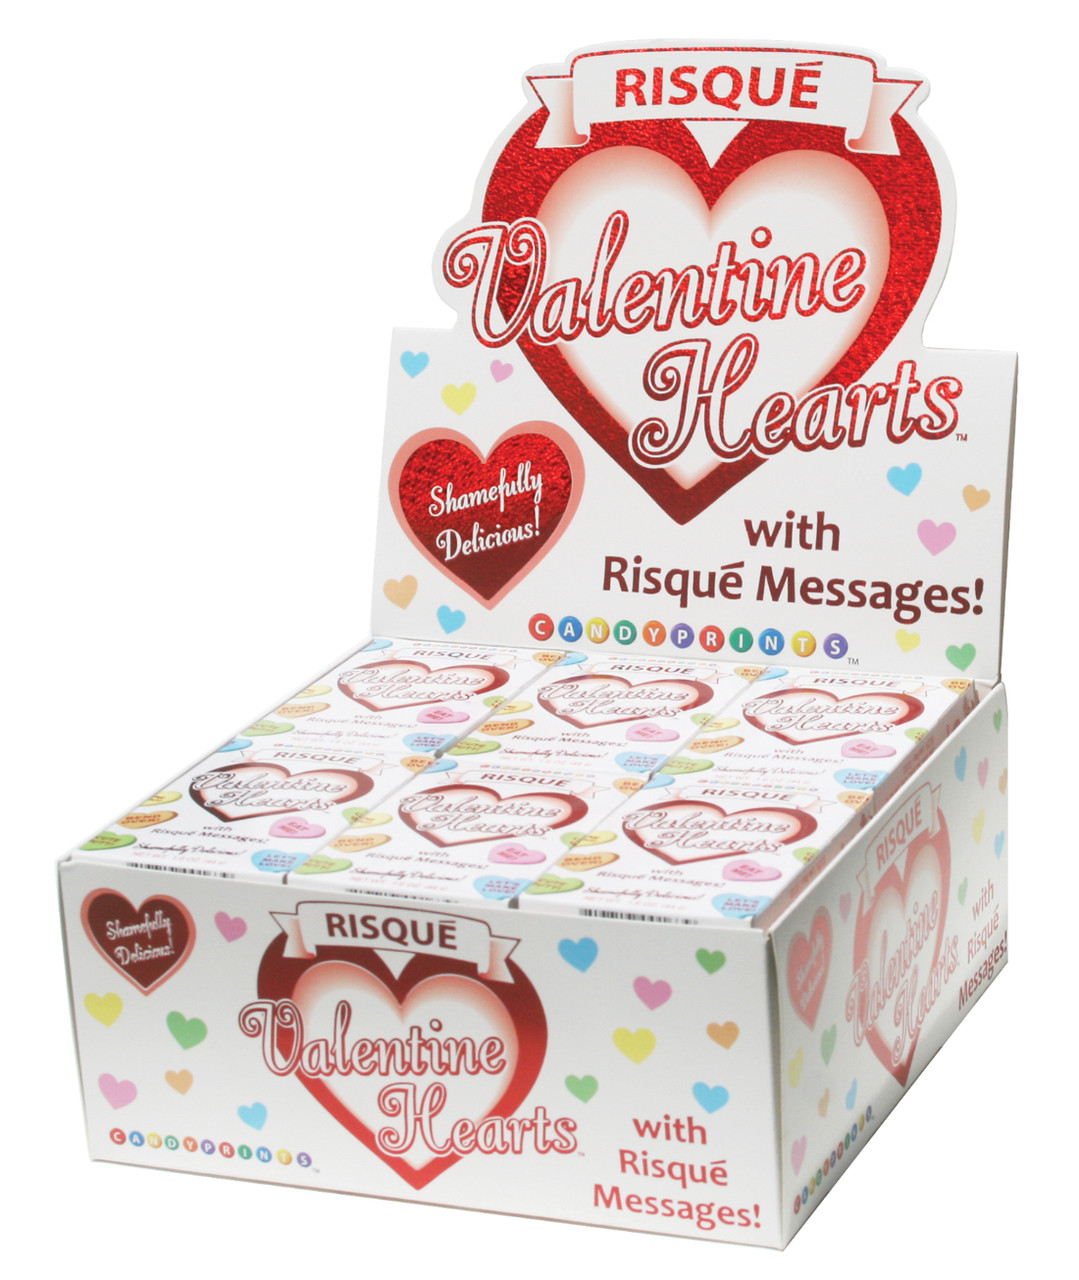 Glass Cover- Candy Conversation Hearts – Switchables